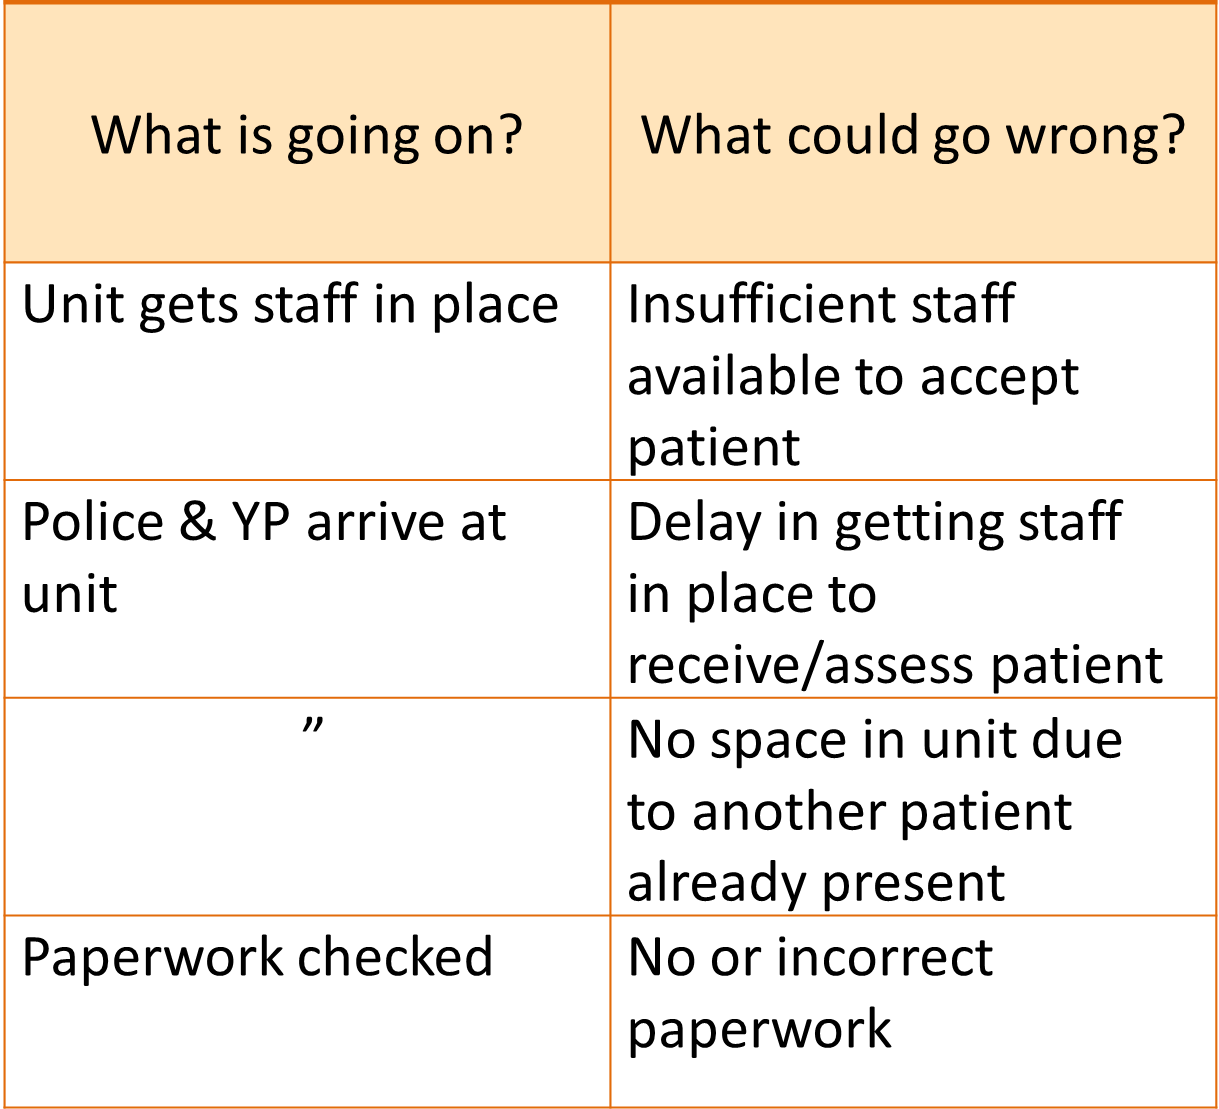 An example from an SSA. This one is a portion from the risk table from the Section 136 case study, showing the things that could go wrong at some of the steps in the process. The first step is: Unit gets staff in place. This could go wrong by insufficient staff being available to accept patient. The next step is: Police and Young Person arrive at unit. This could go wrong by a Delay in getting staff in place, or No space in unit due to another patient already present. Another step is: Paperwork checked. This could go wrong by No or incorrect paperwork being available.